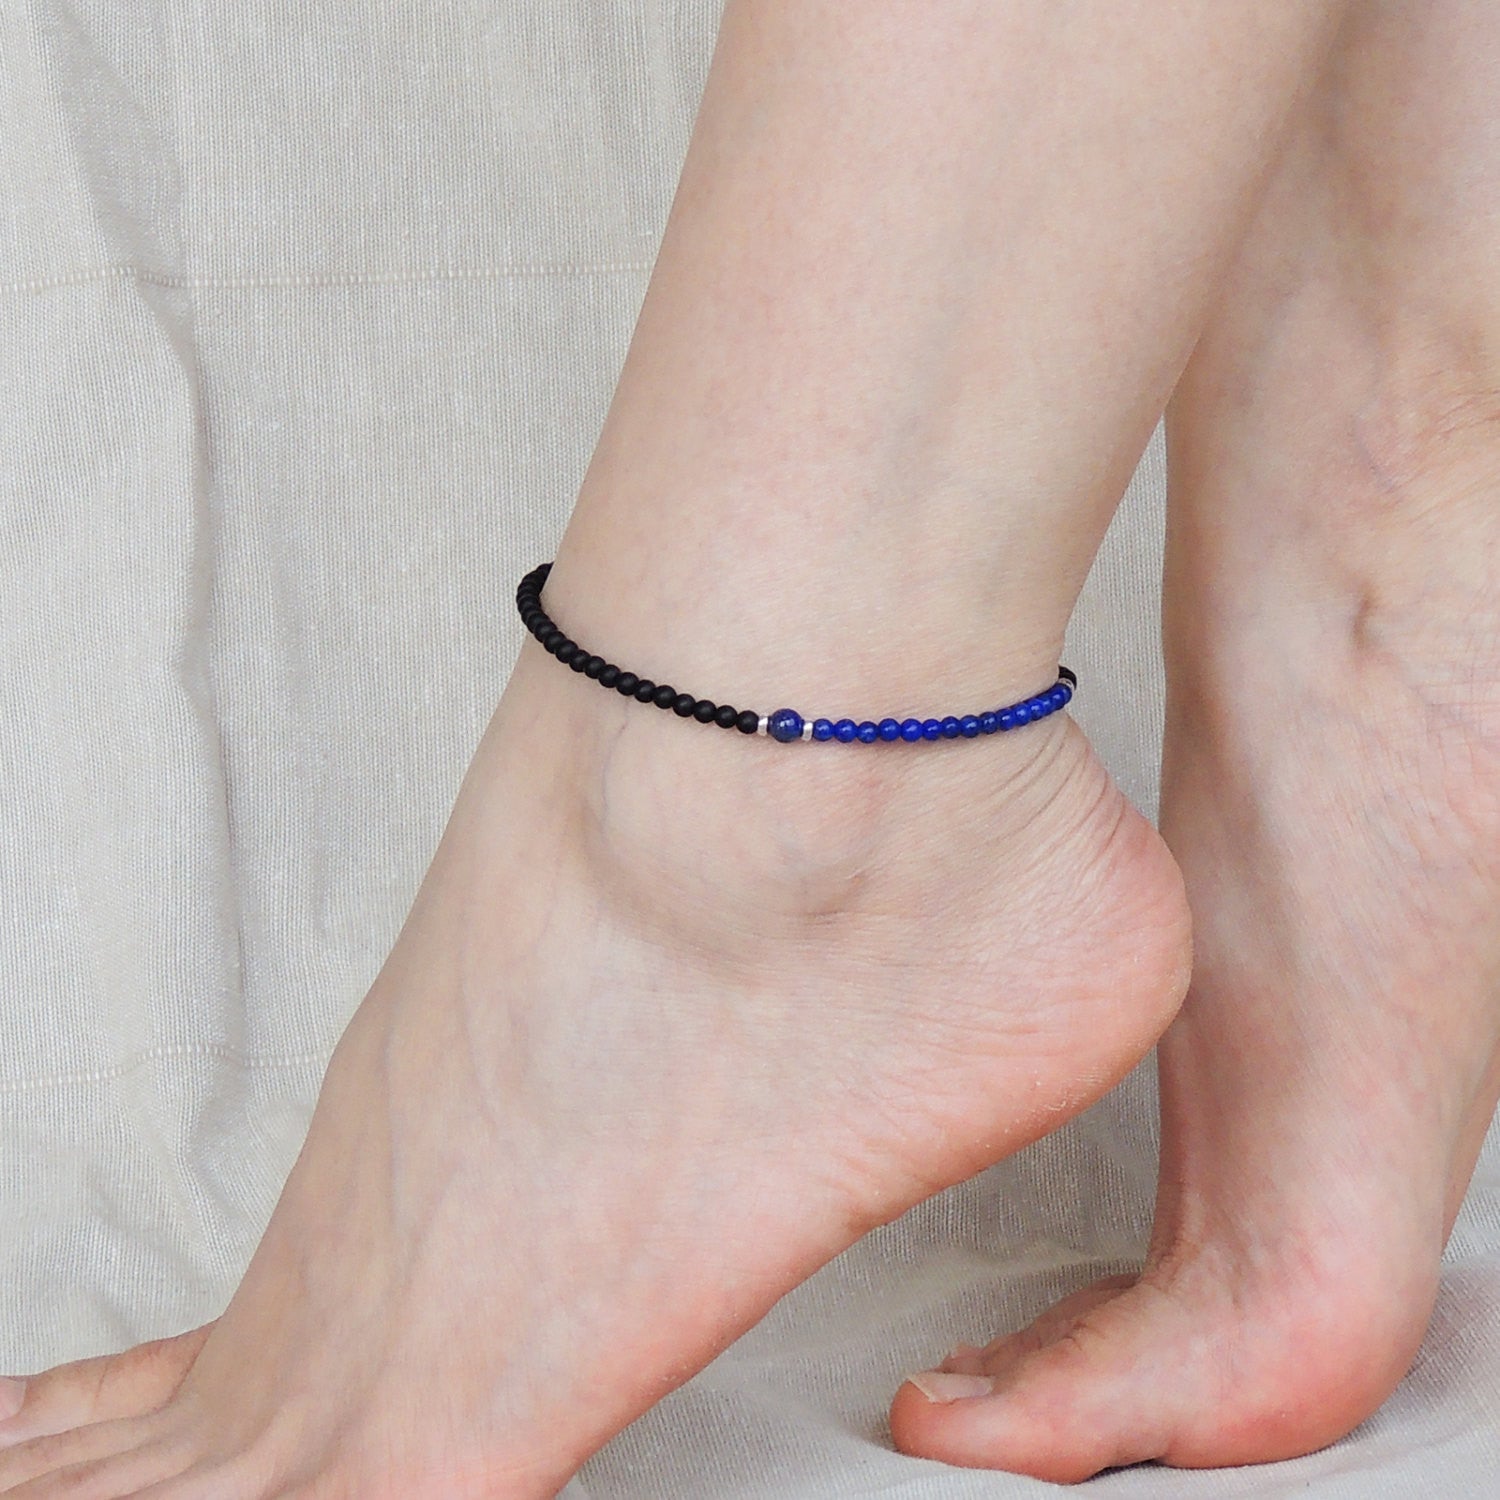 Lapis Lazuli & Matte Black Onyx Healing Gemstone Anklet with S925 Sterling Silver Spacers & Clasp - Handmade by Gem & Silver AN009